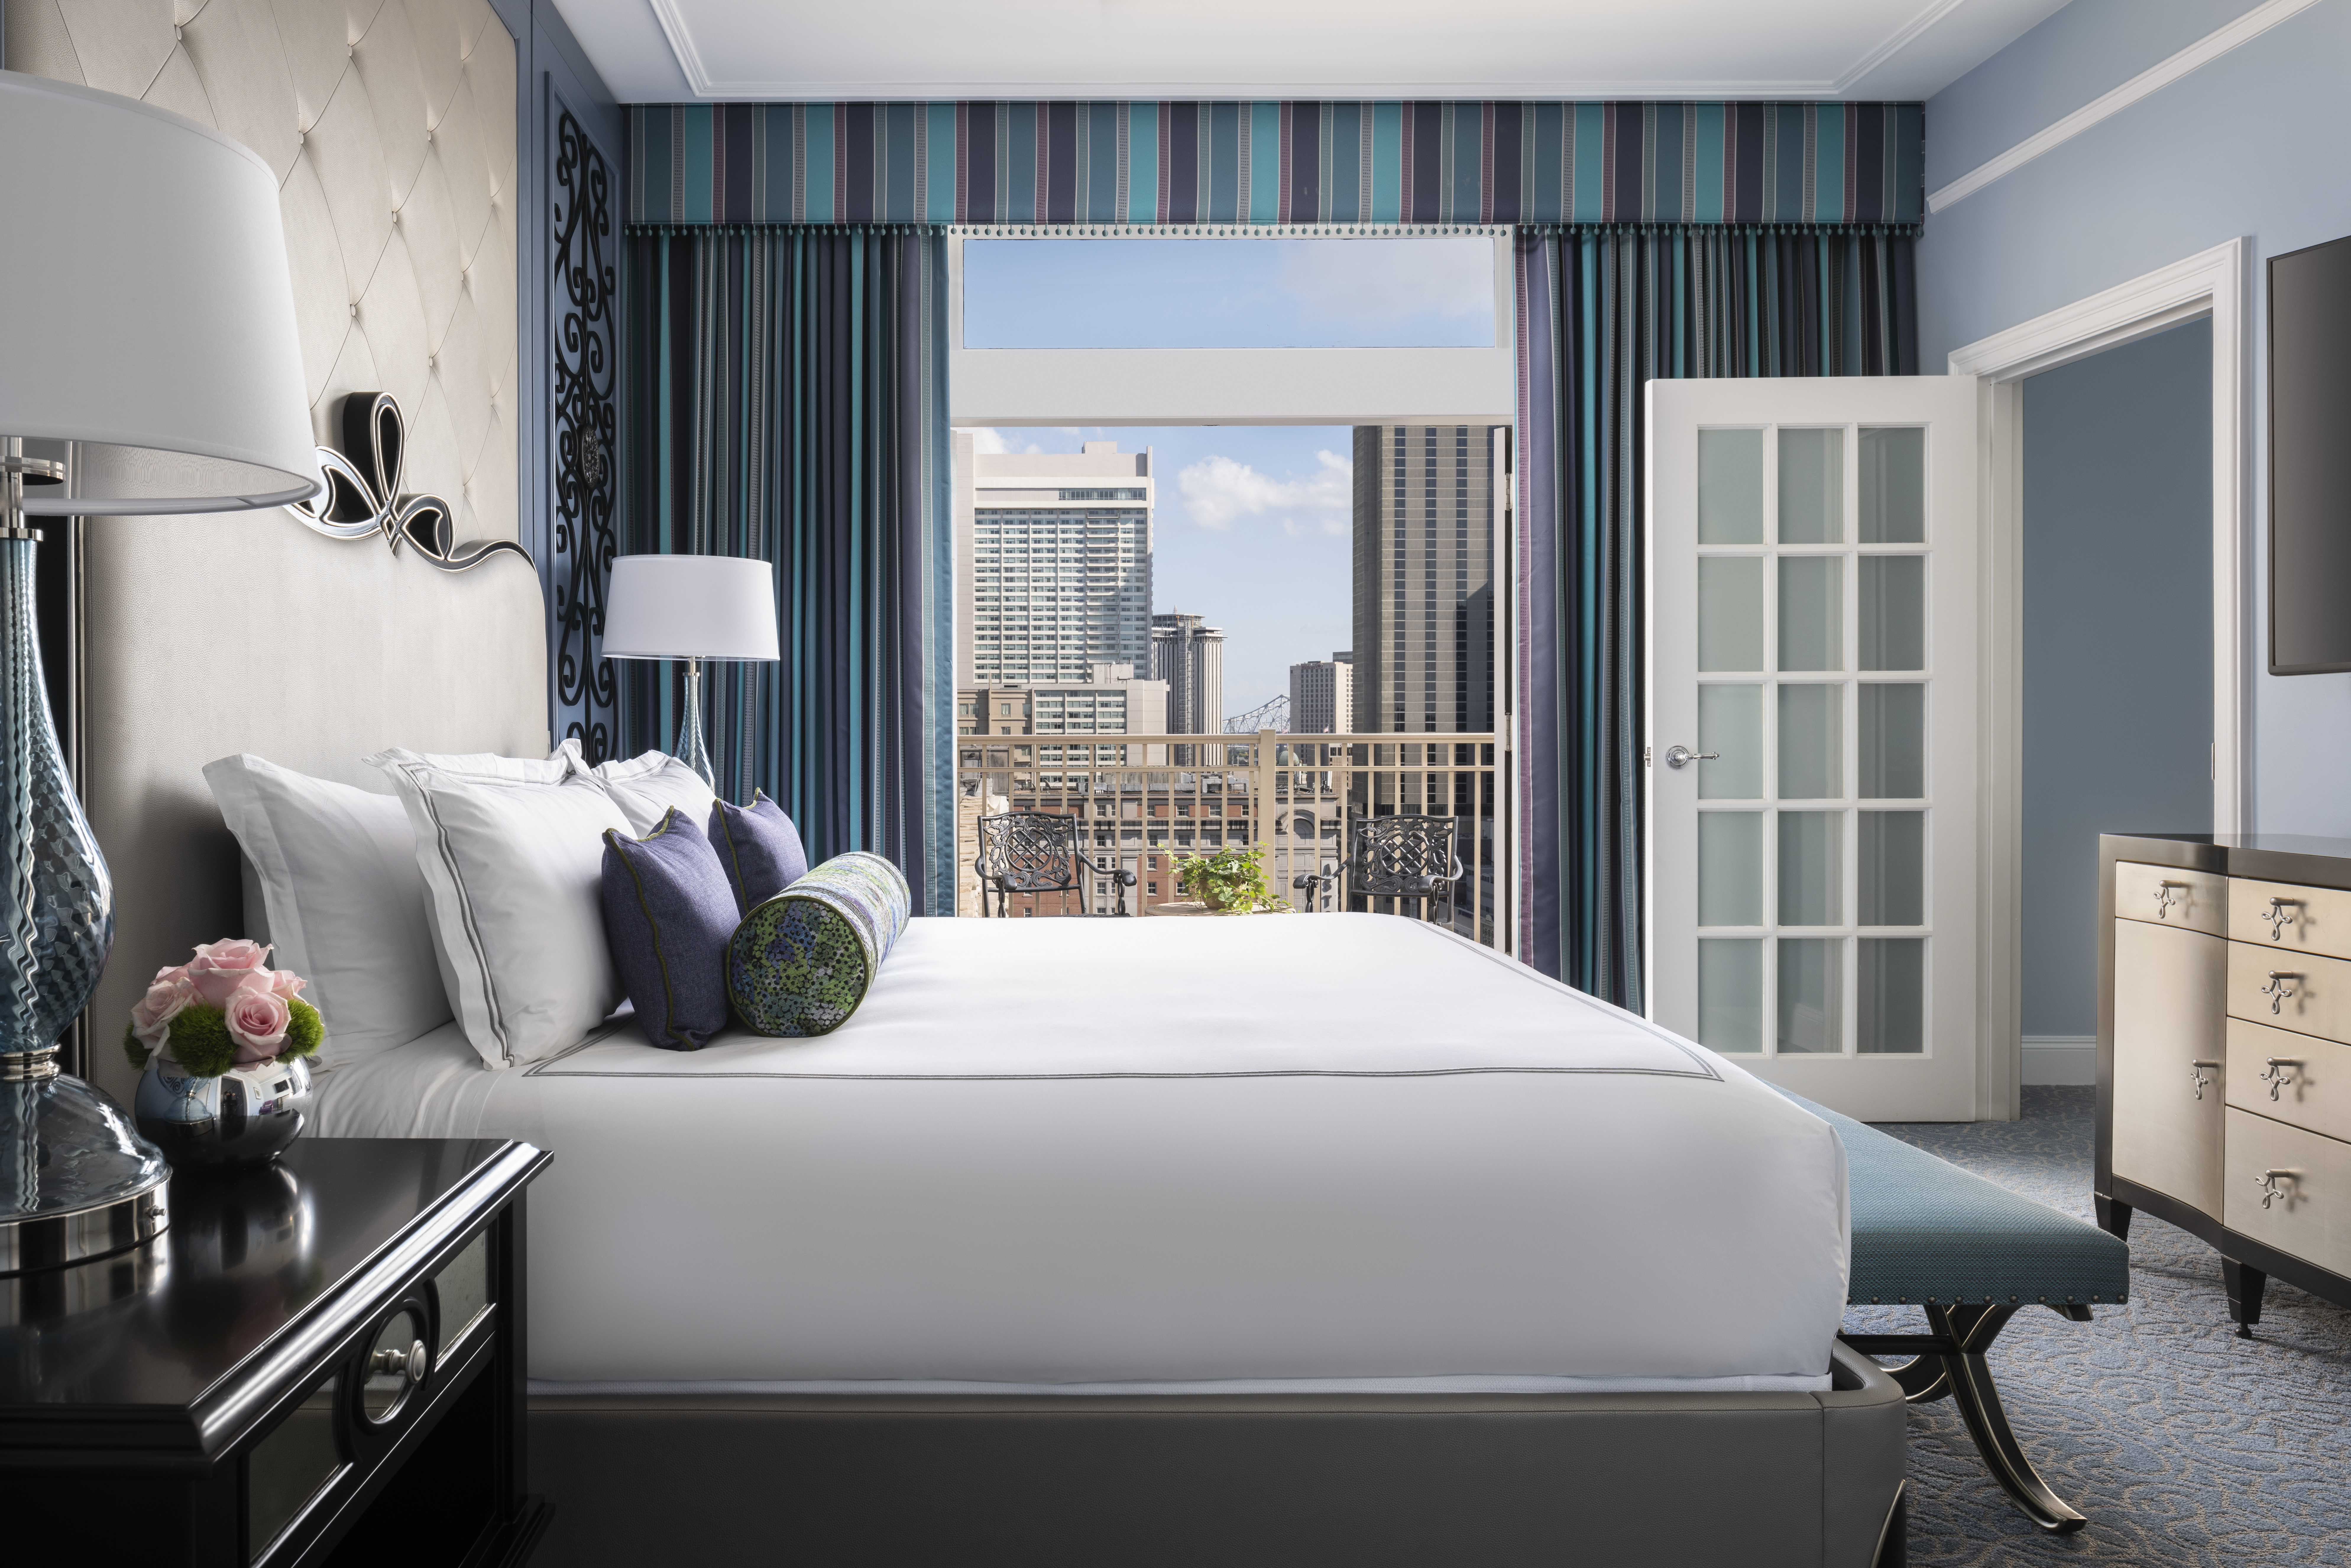 The Ritz-Carlton New Orleans - Guest Room and Corridor Interior Renovations - 2019